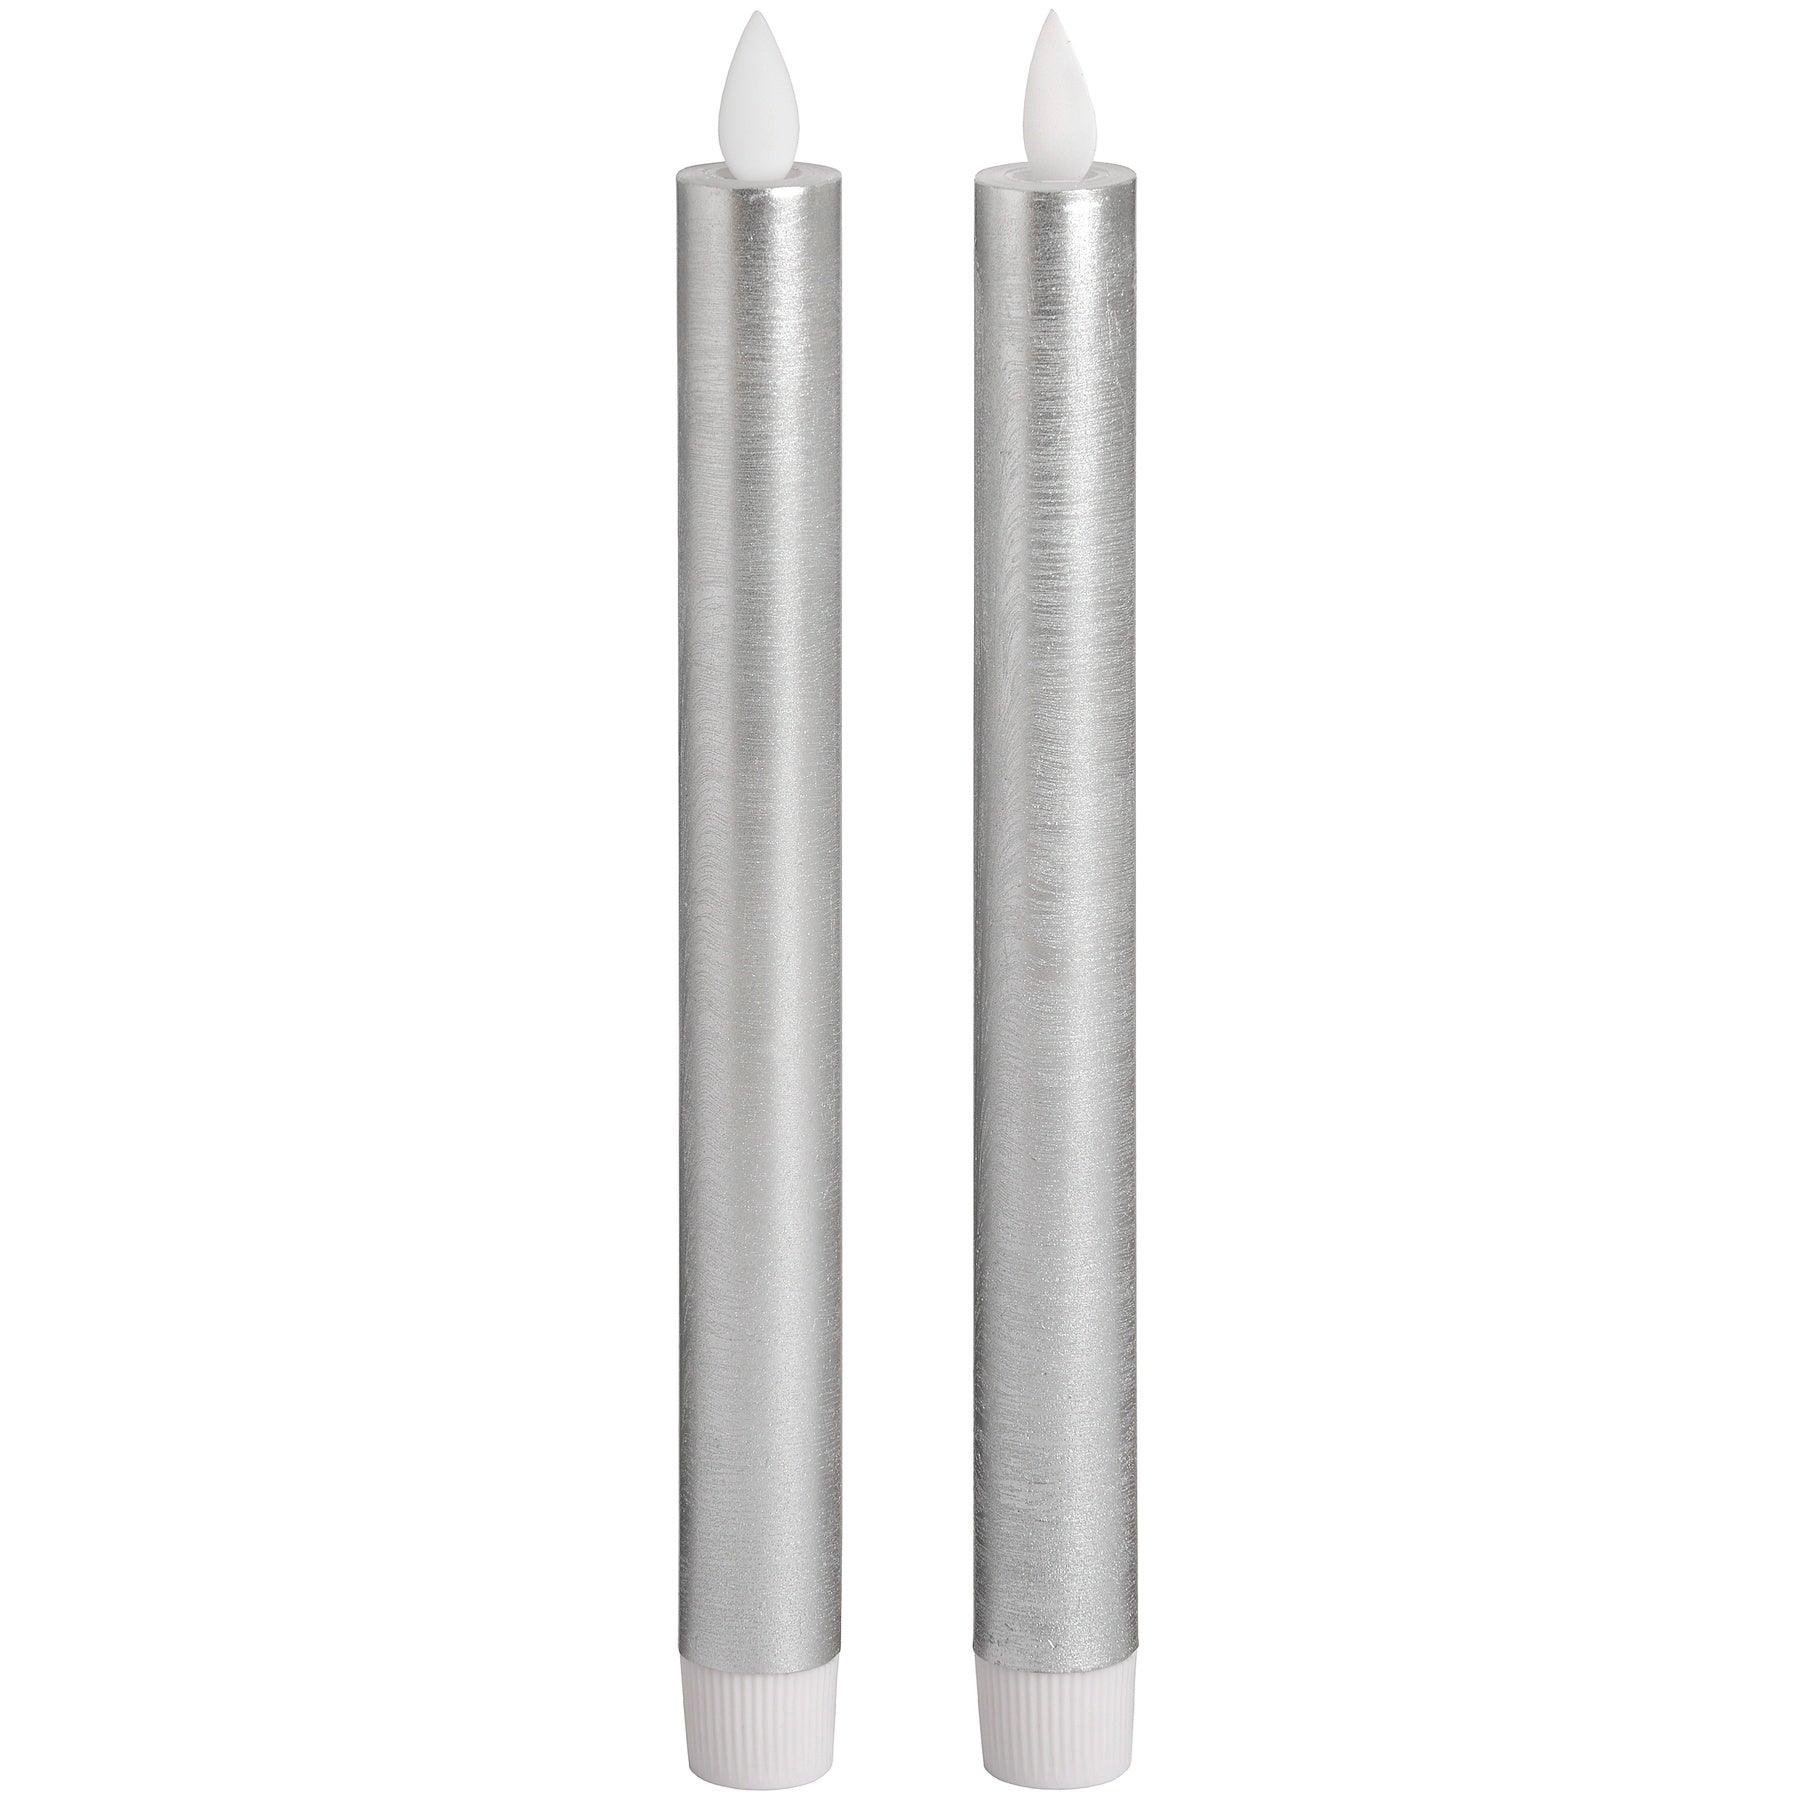 Pair Of Silver Luxe Flickering Flame LED Wax Dinner Candles - Vookoo Lifestyle